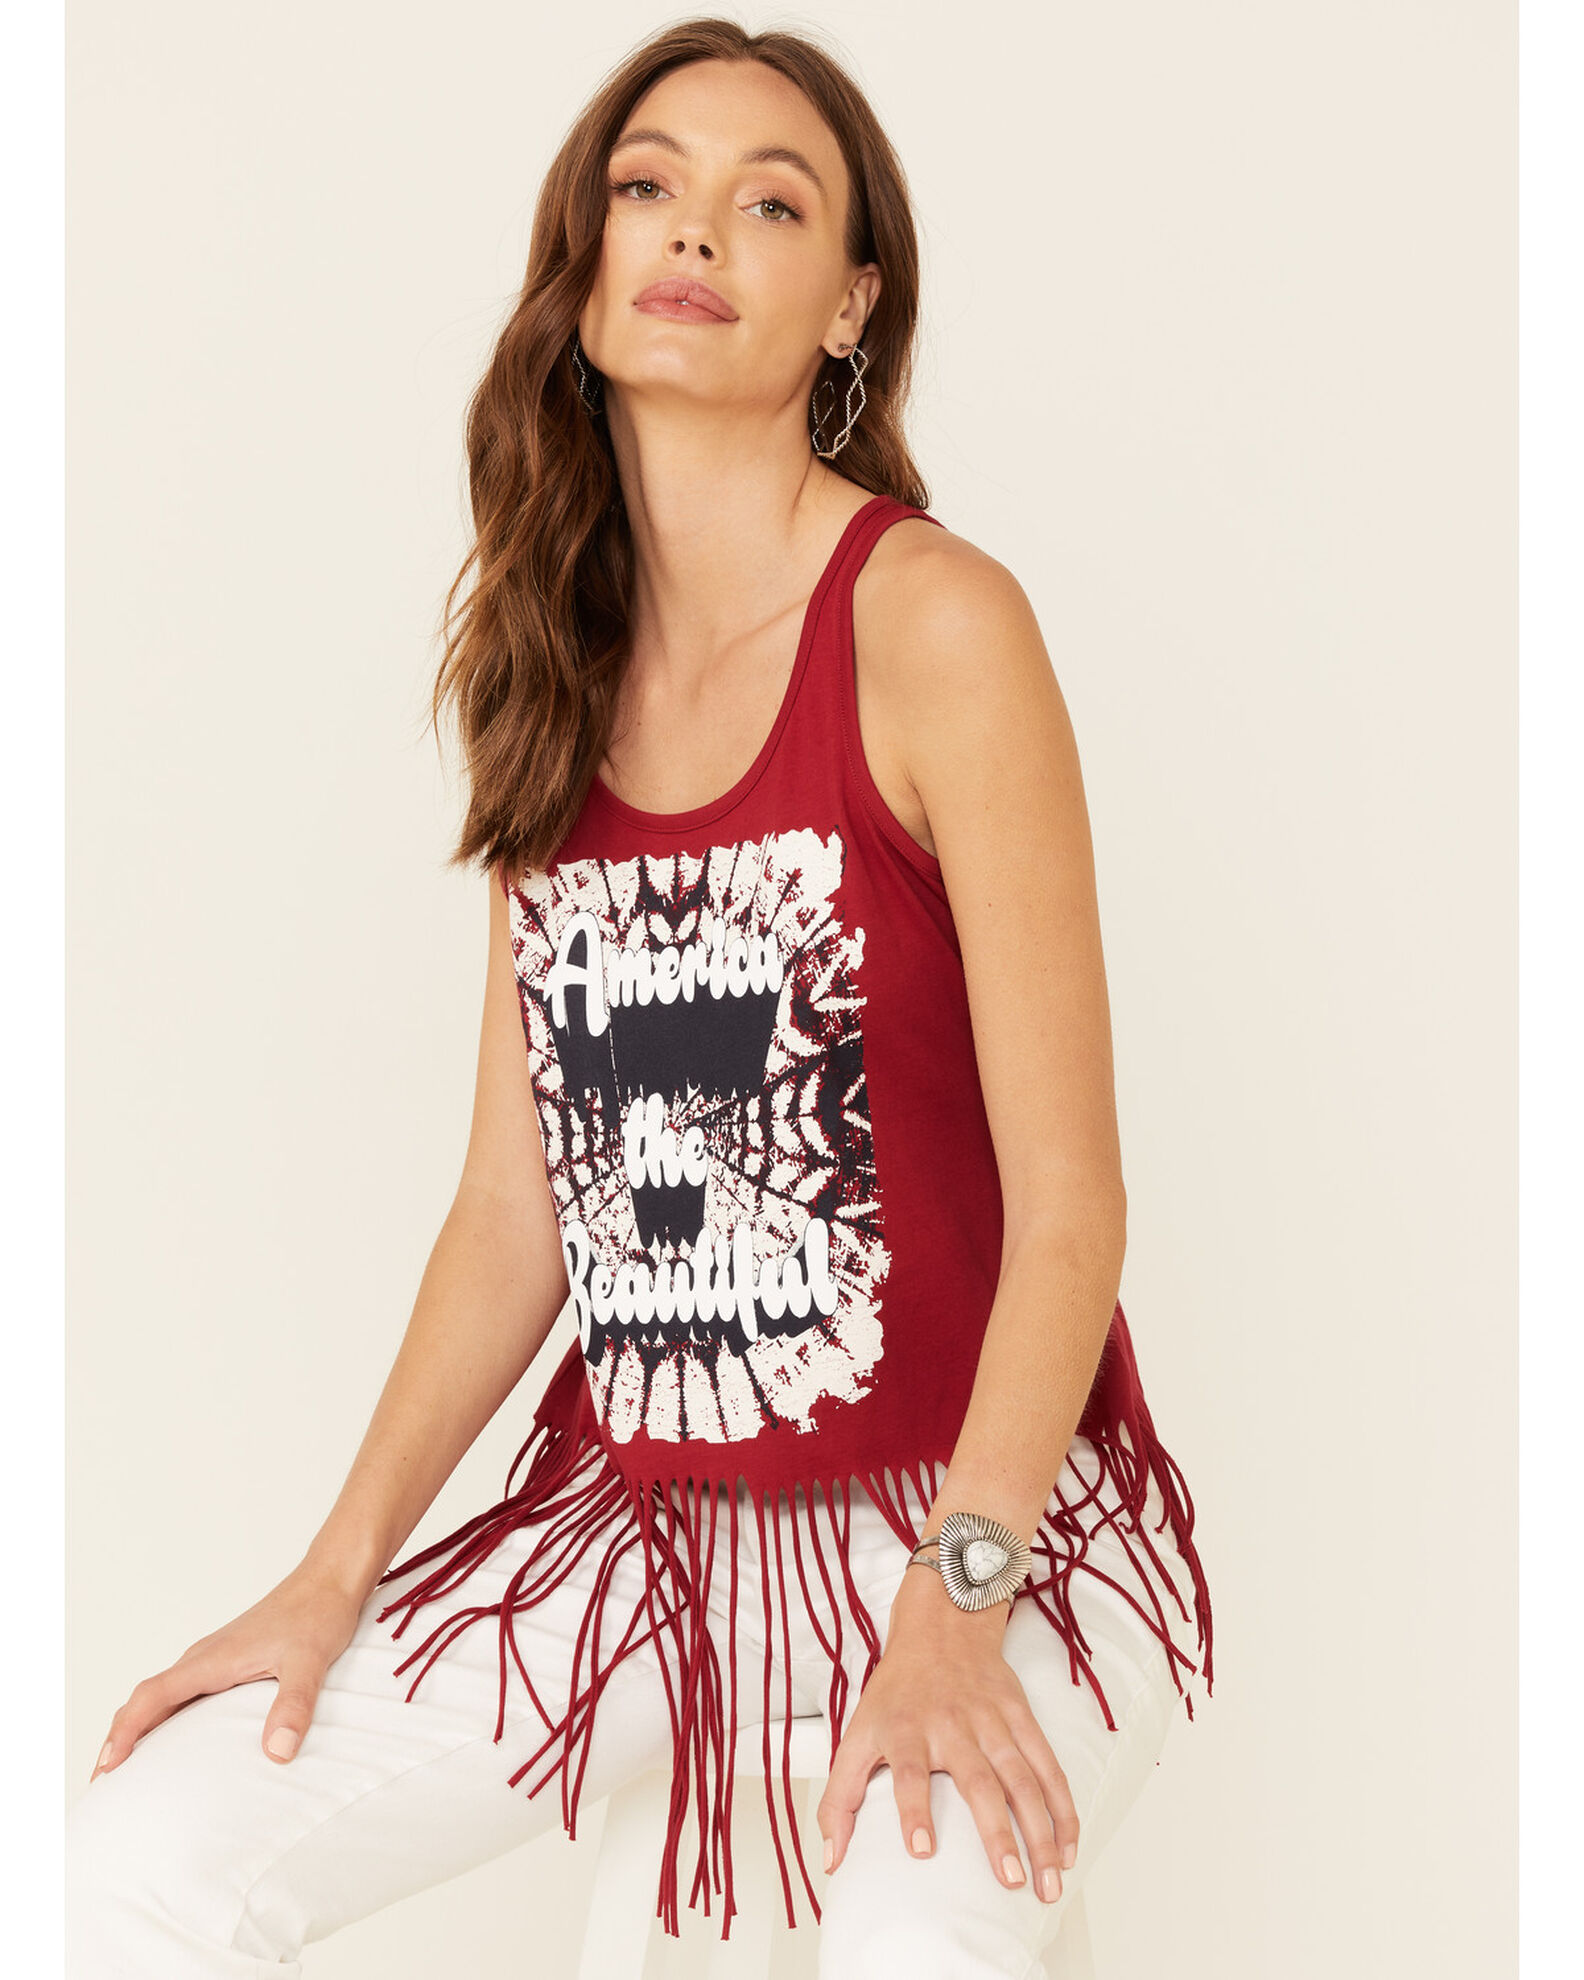 Product Name: Shyanne Women's America The Beautiful Graphic Fringe Tank Top